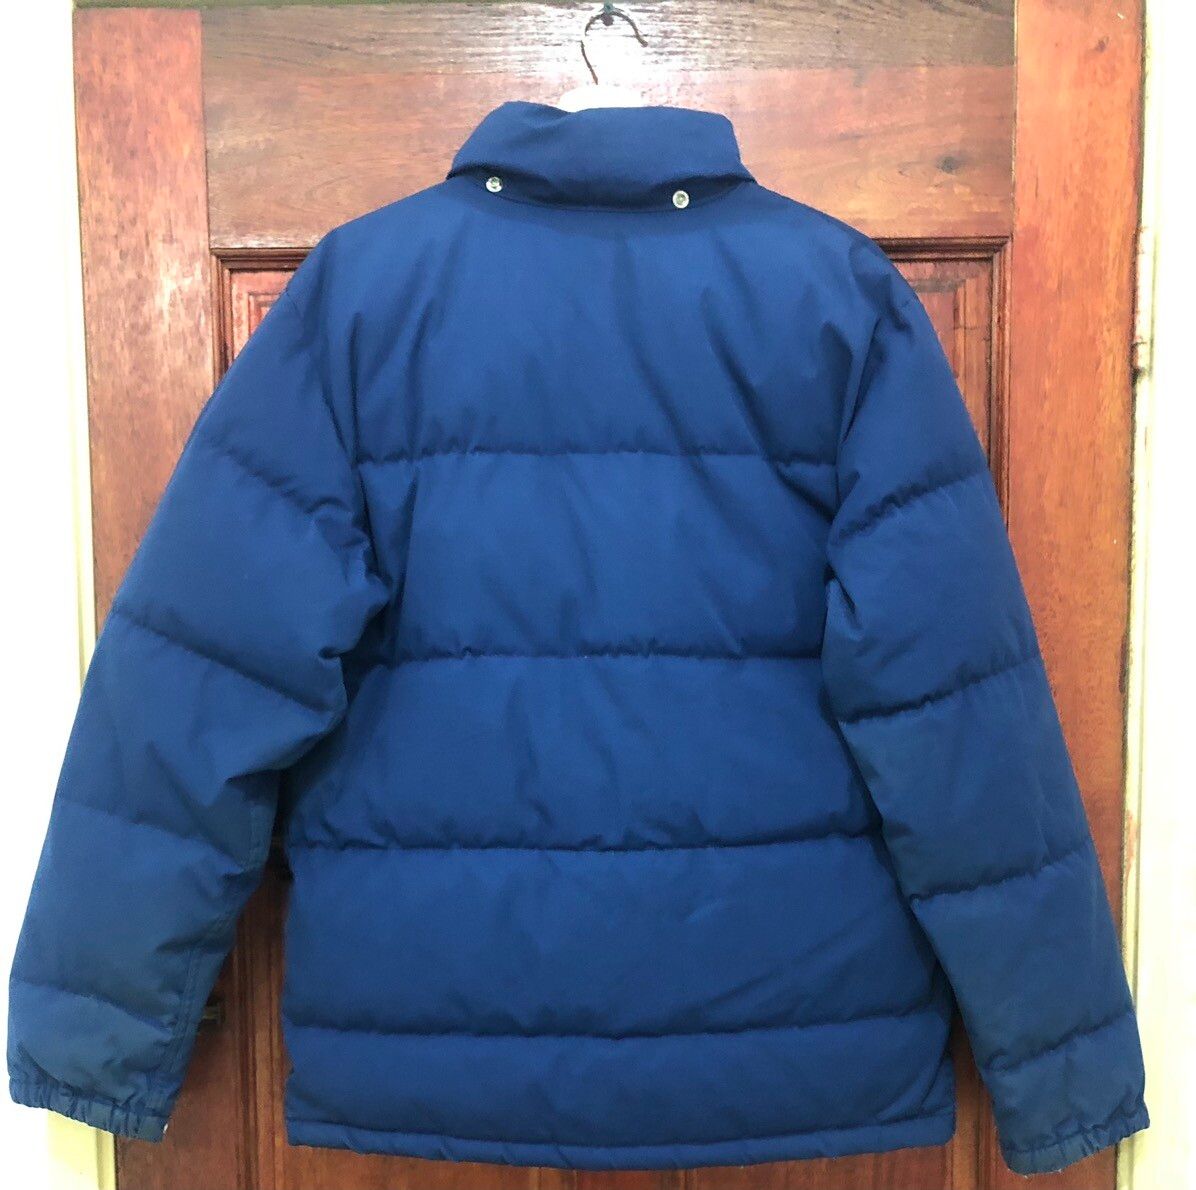 Vintage 90s The North Face Puffer Jacket - 2